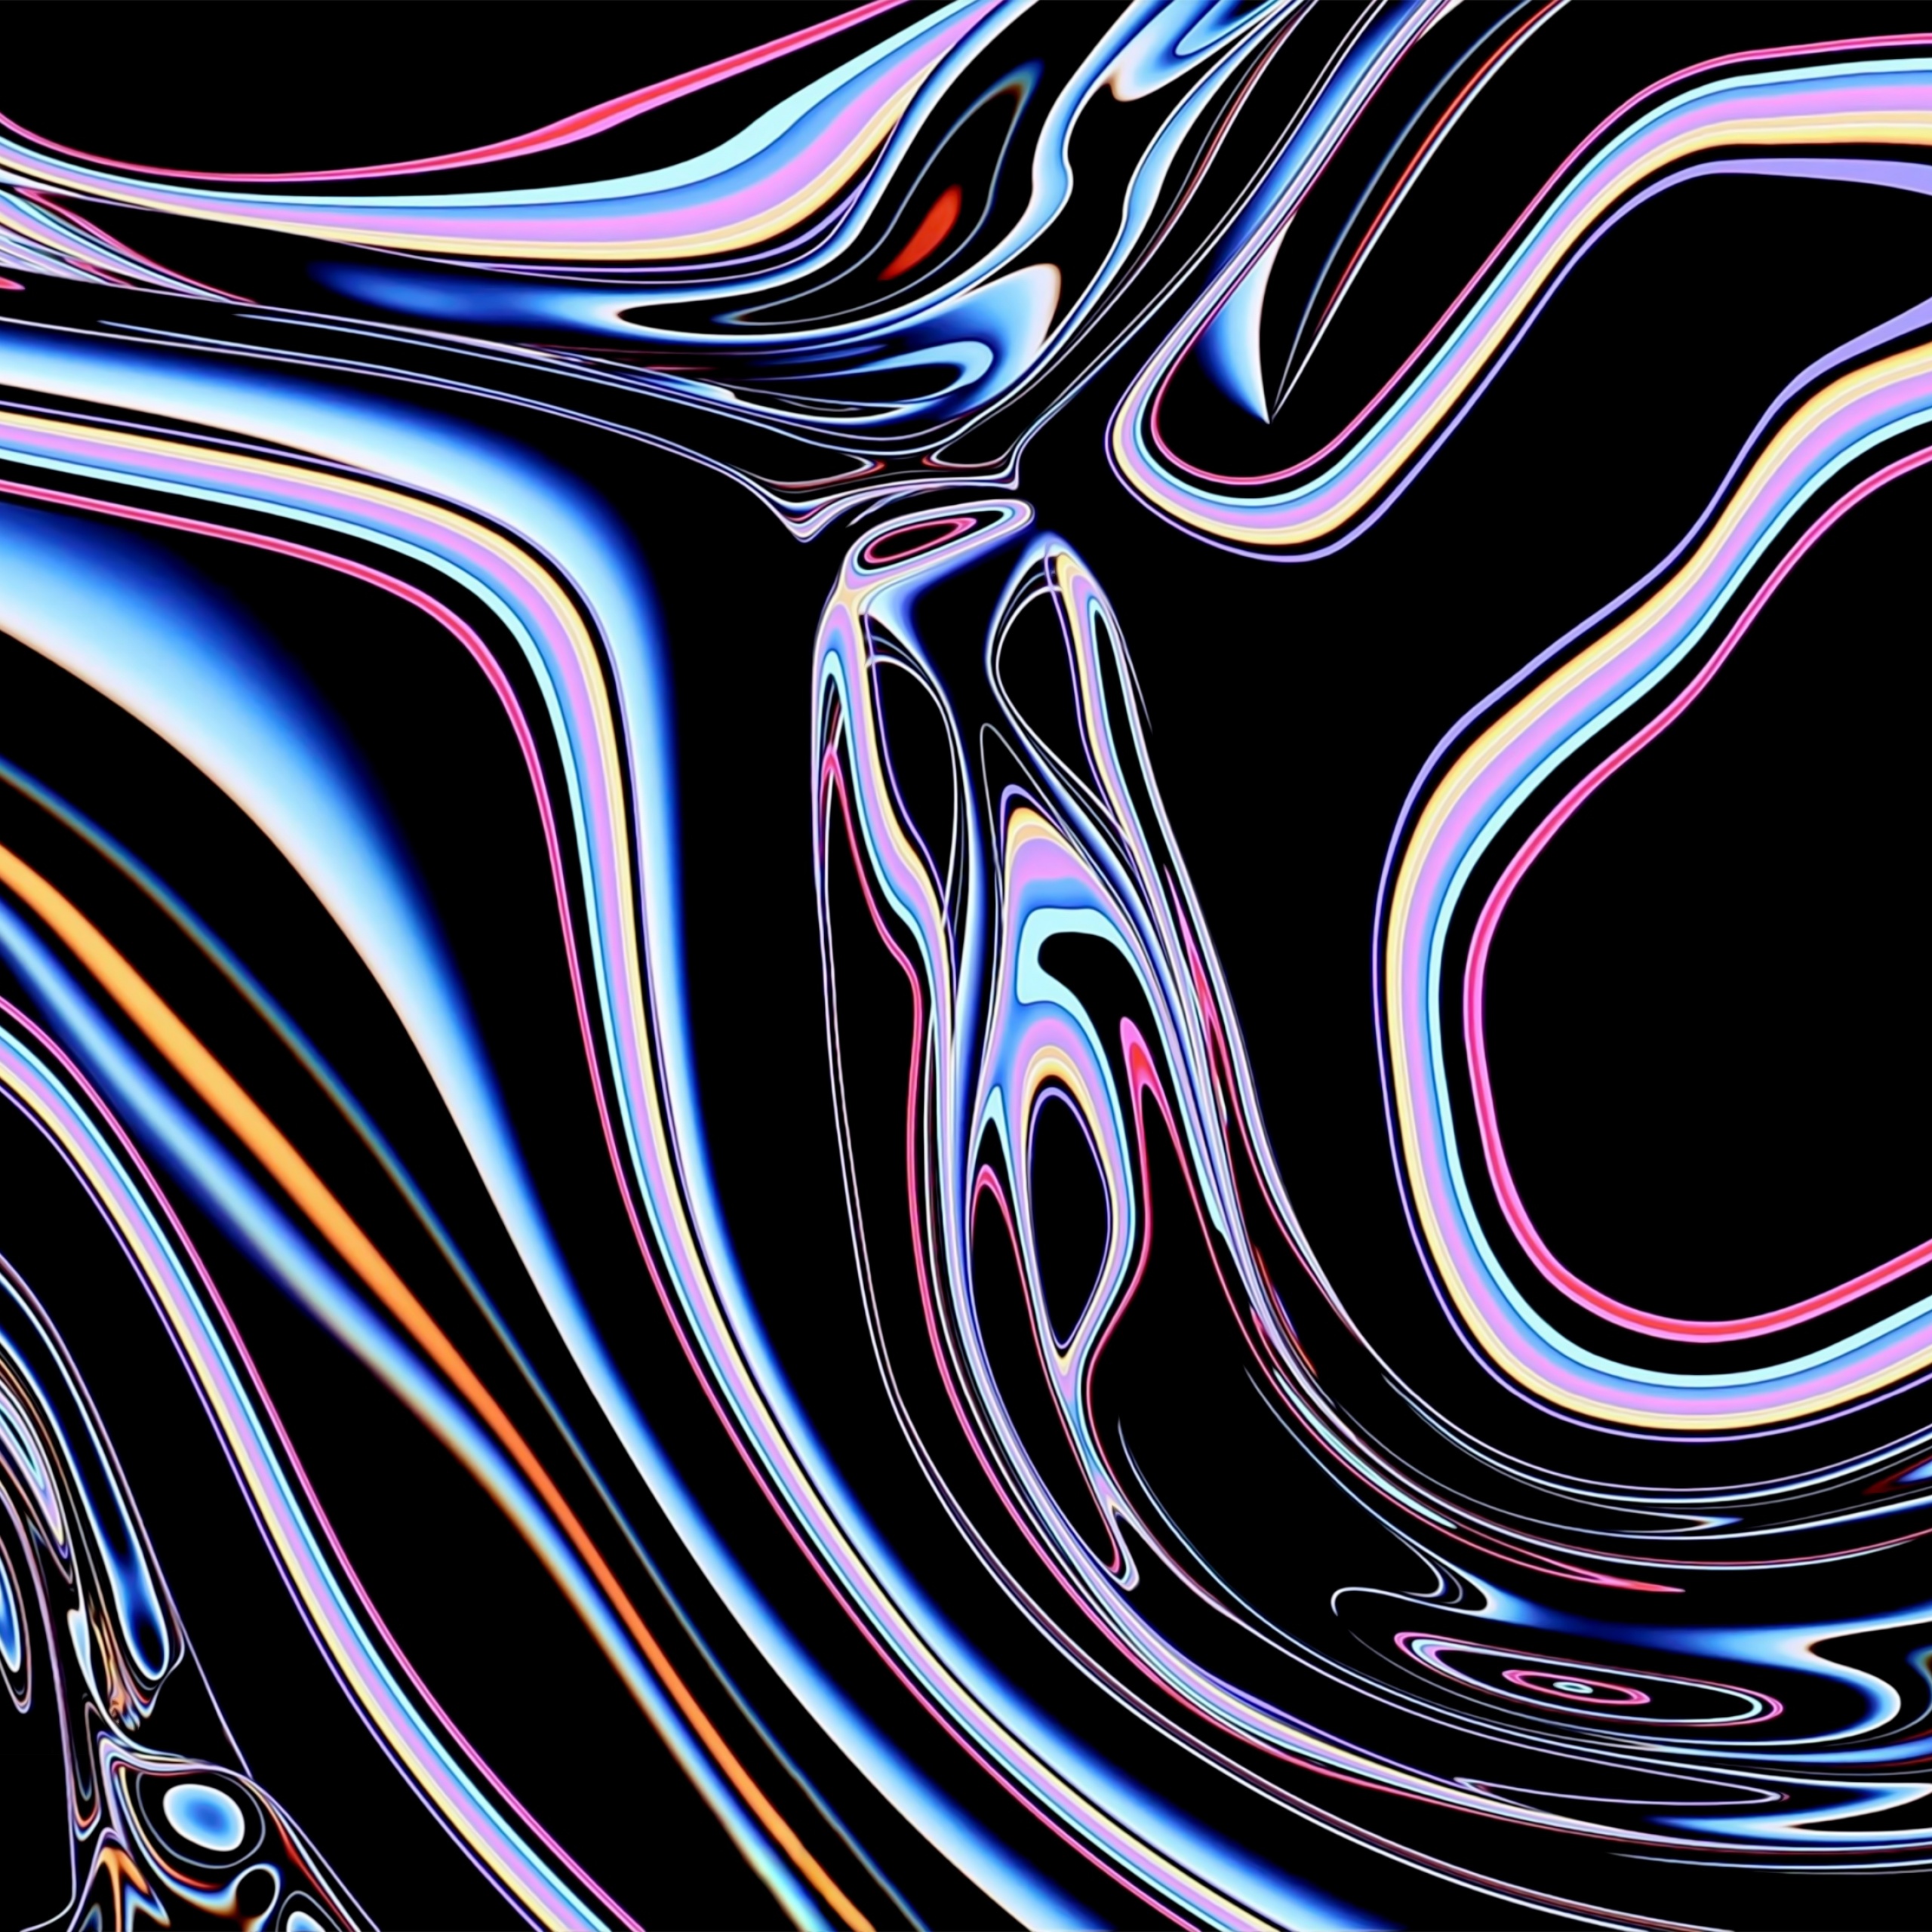 12 Fluid Gradient Wallpapers in 6K Graphic by HipFonts · Creative Fabrica